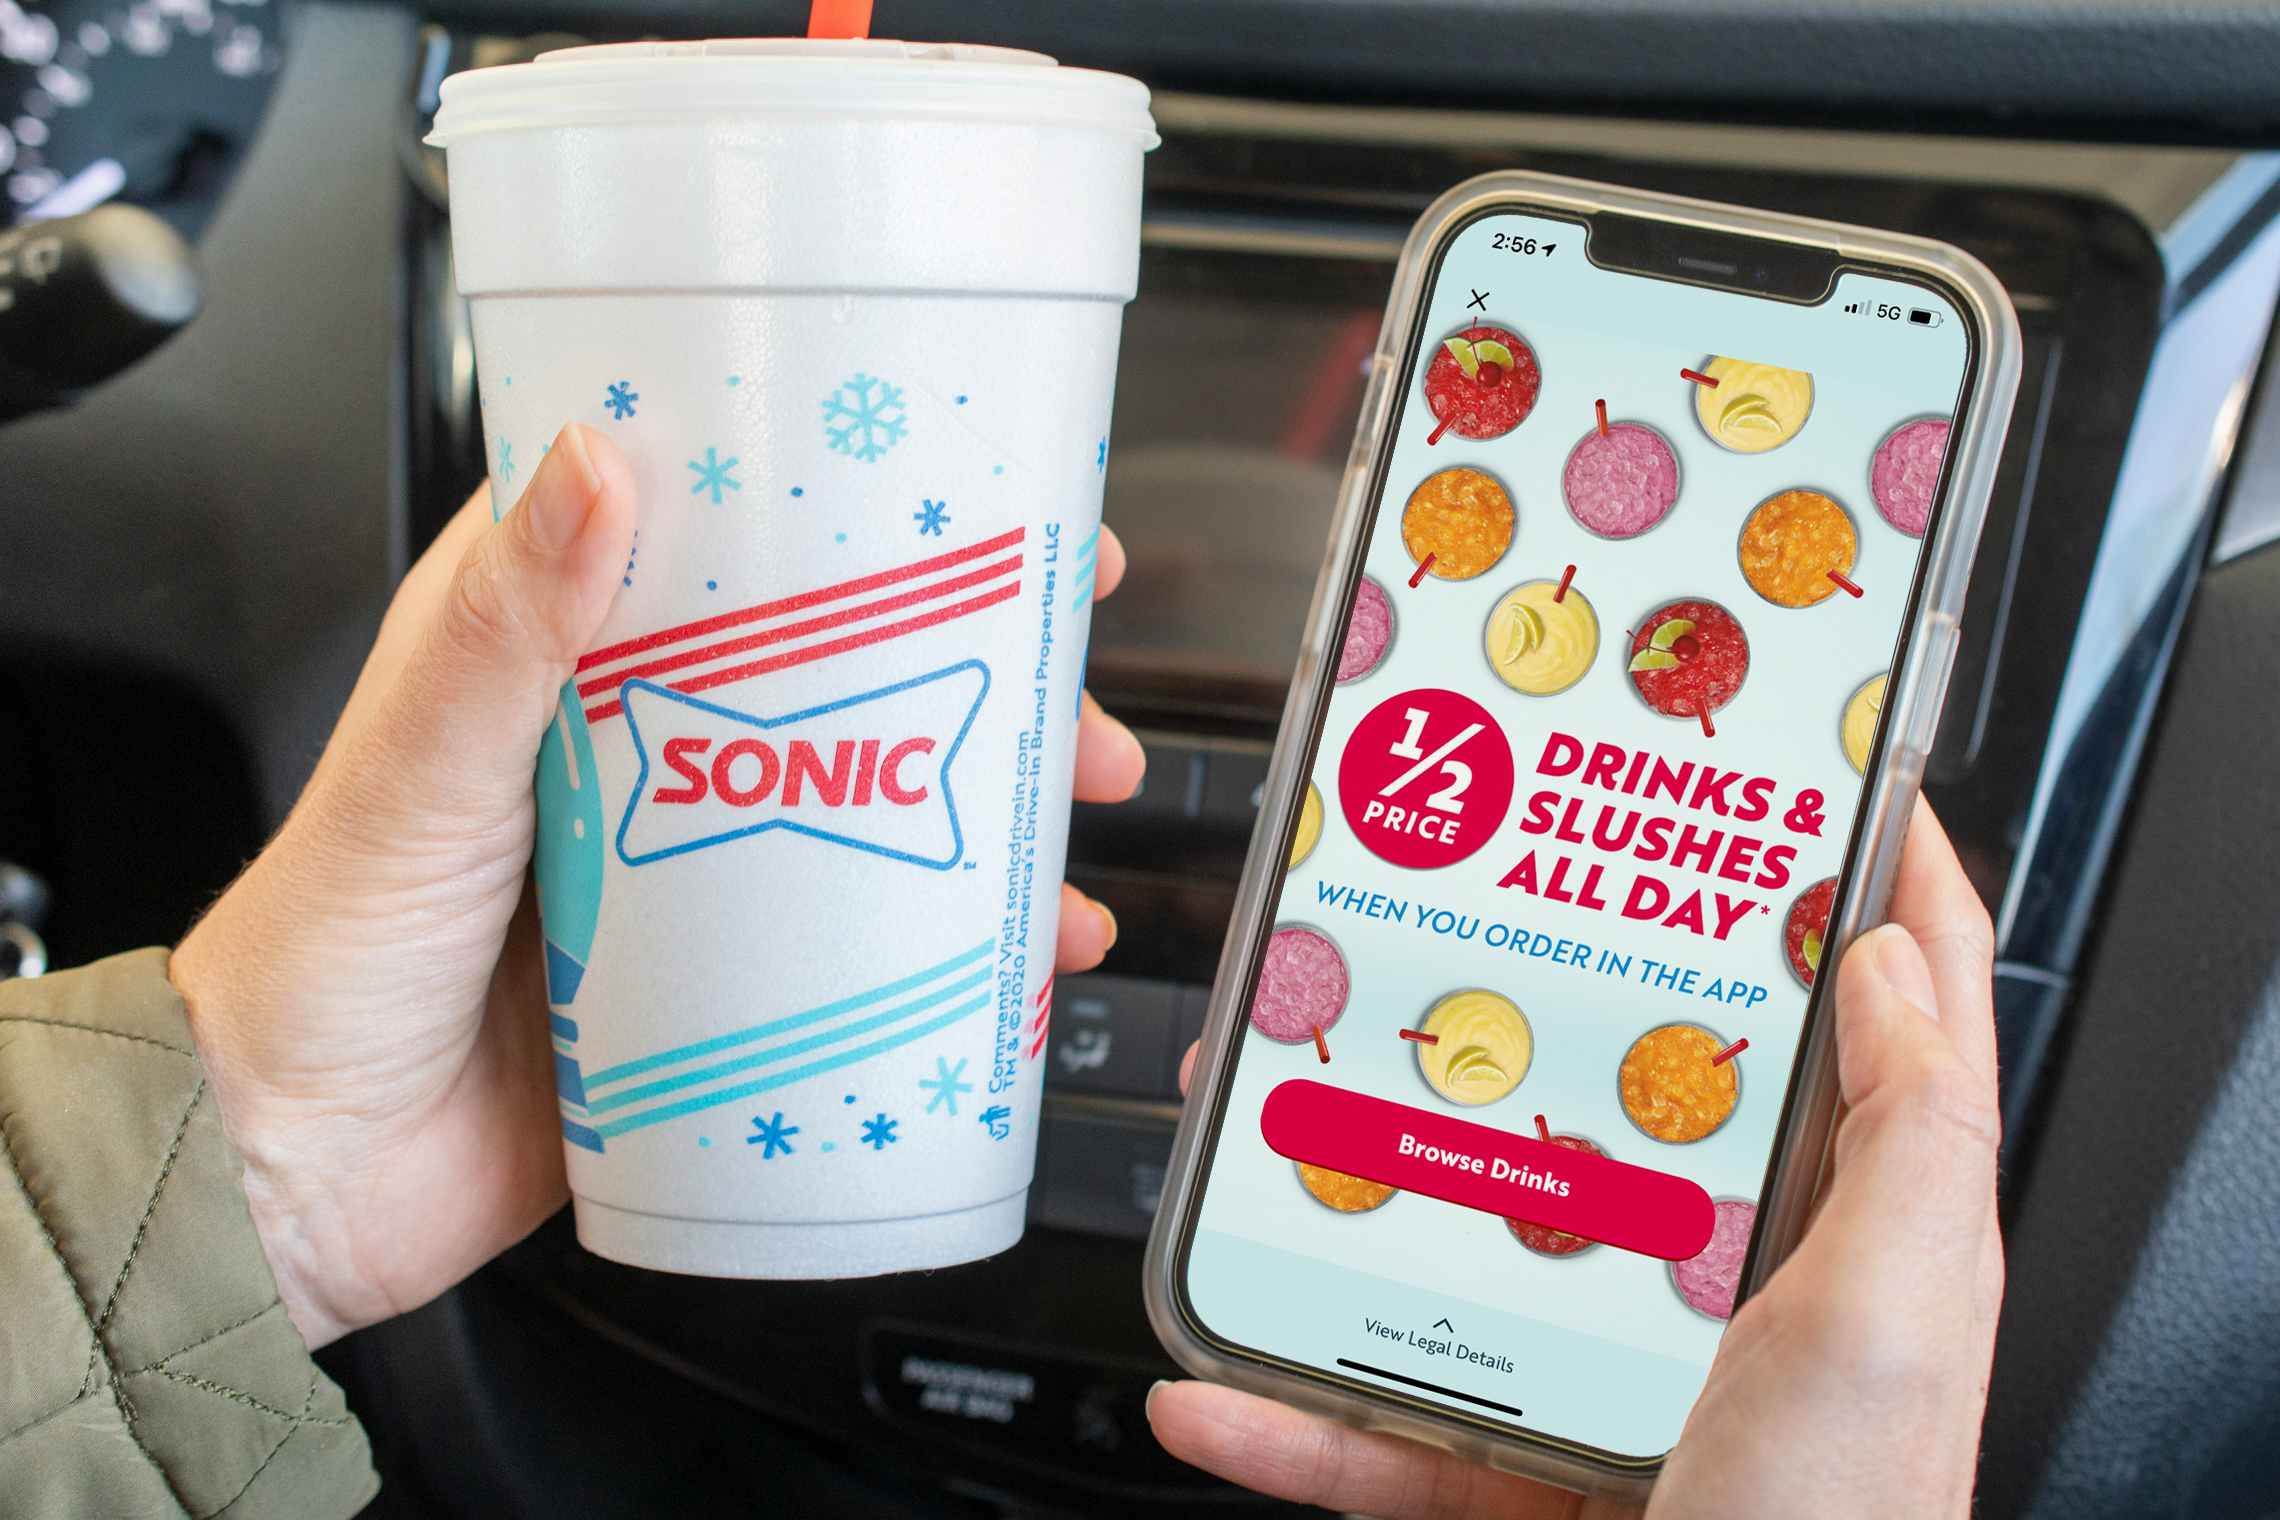 A person sitting in their car, holding a Sonic drink cup next to their cell phone, displaying an advertisement for Sonic that reads, "1/2 price drinks & slushes all day when you order in the app